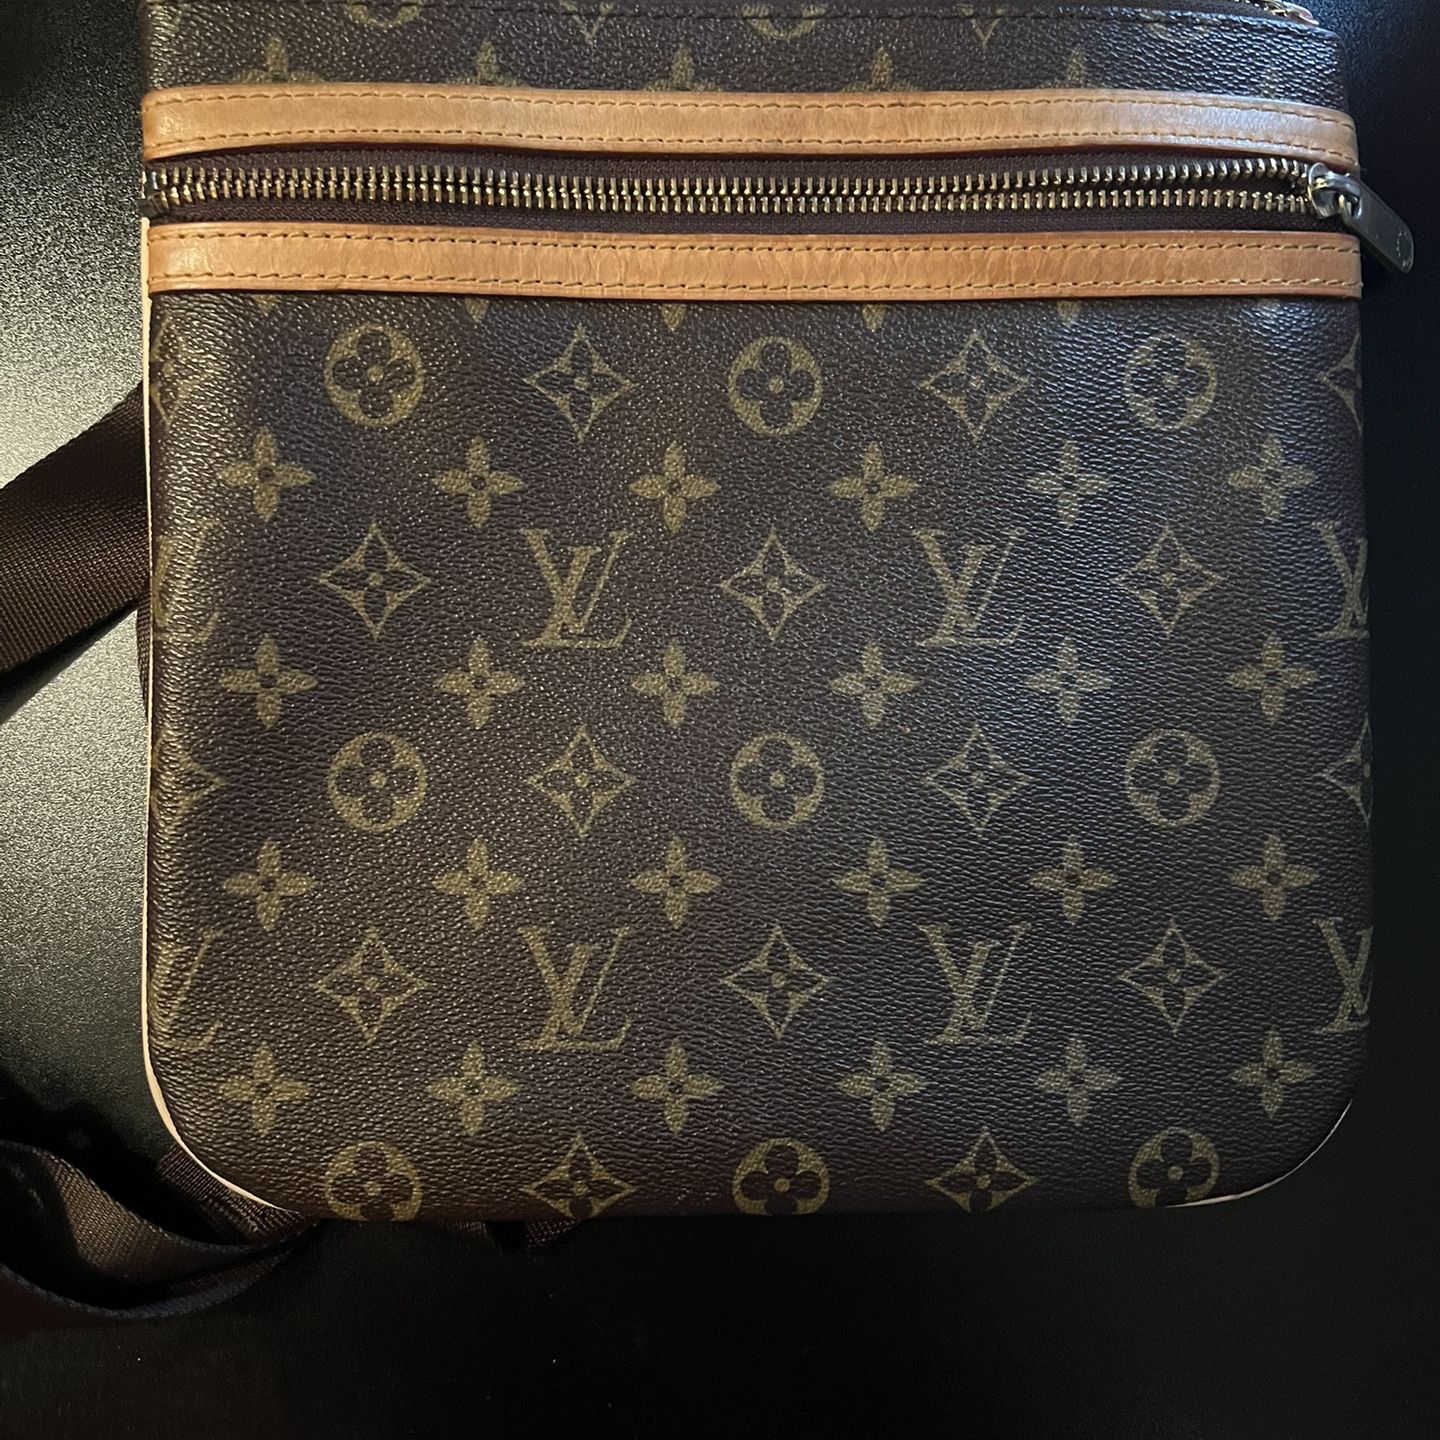 Two Louis Vuitton Gift Boxes for Sale in Chula Vista, CA - OfferUp